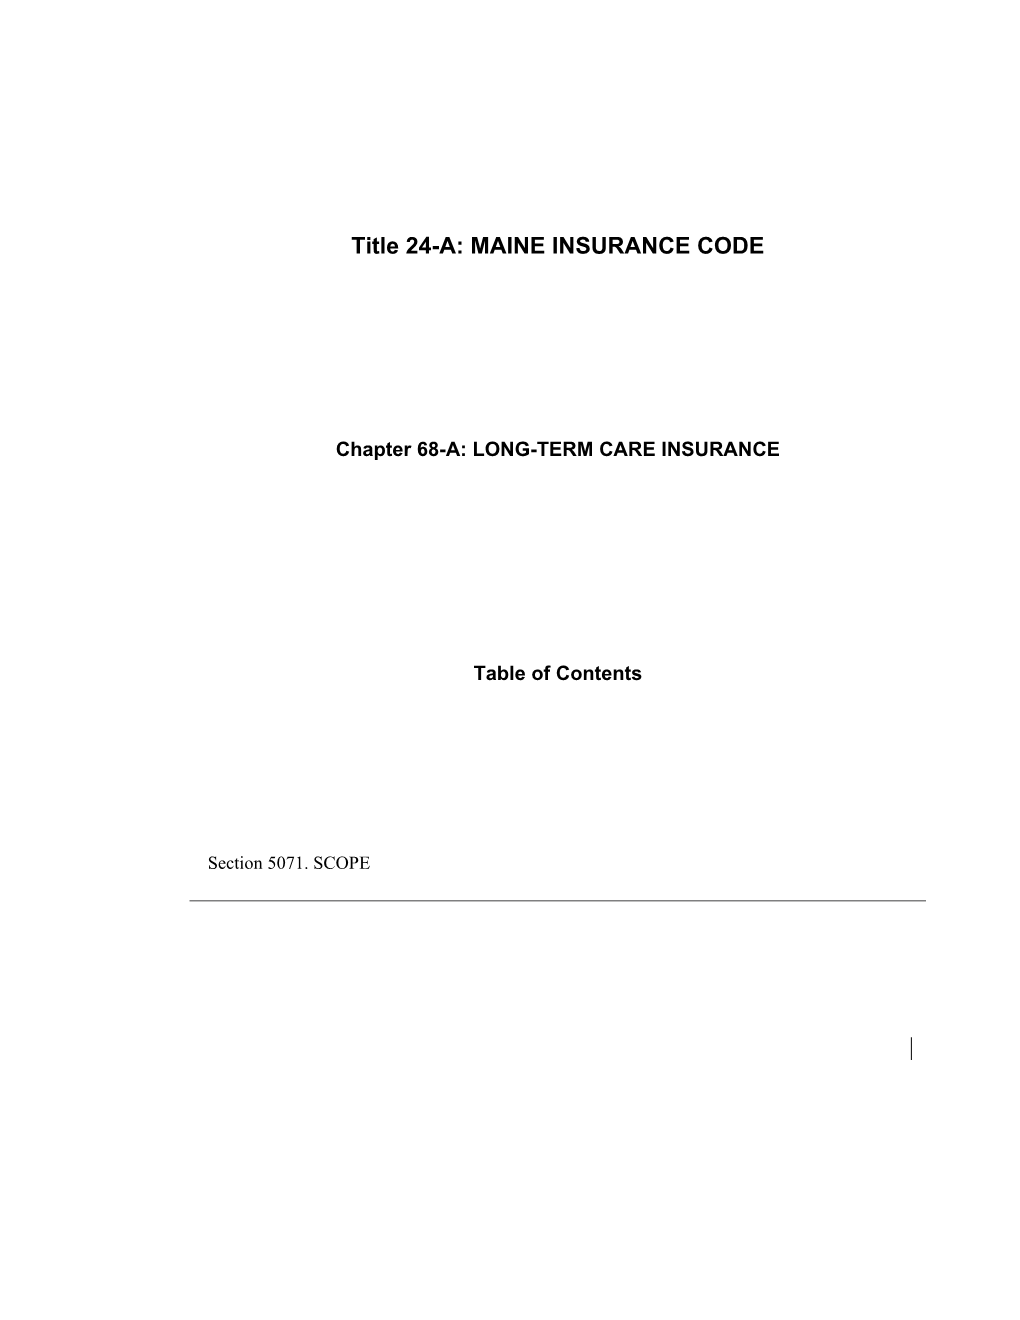 MRS Title 24-A, Chapter 68-A: LONG-TERM CARE INSURANCE